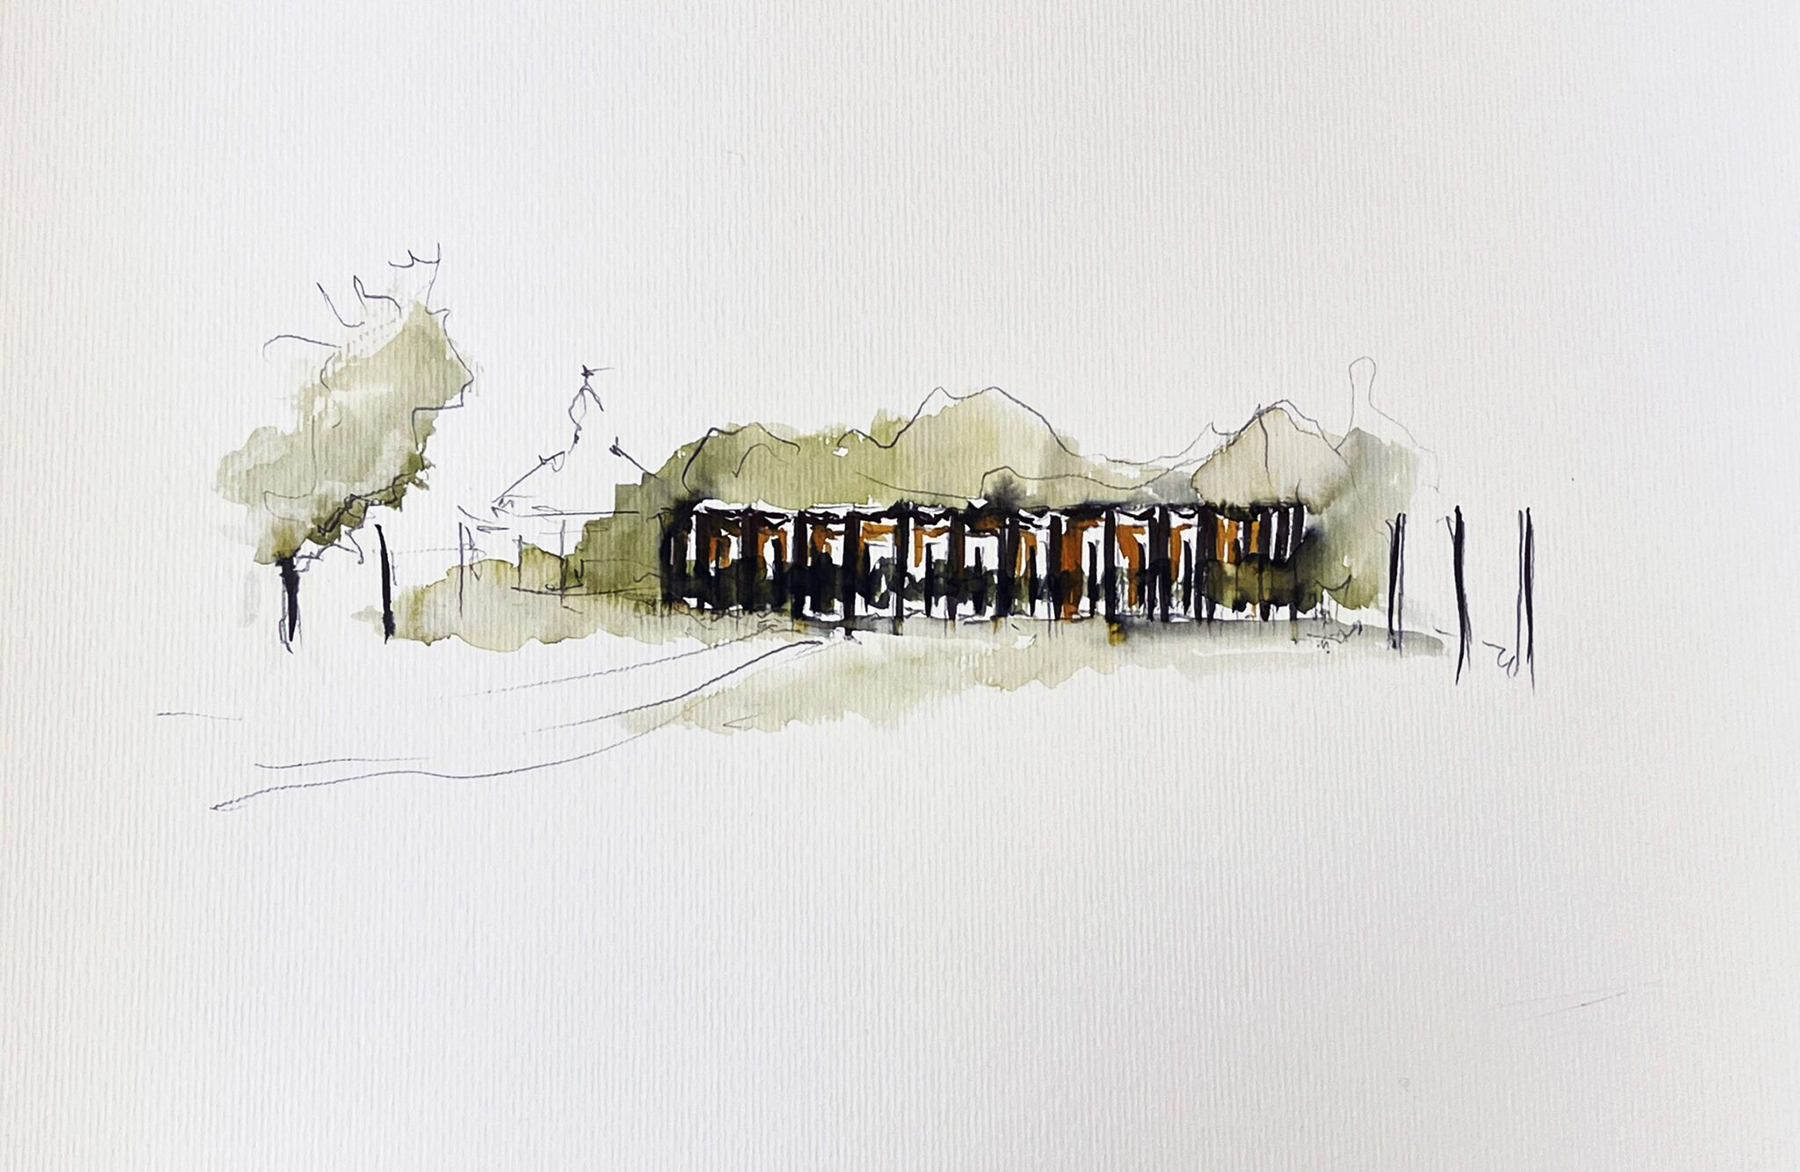 Serpentine Pavilion 2023 designed by Lina Ghotmeh — Architecture Built with Nature Ink, Pencil & Watercolor Sketch by © Lina Ghotmeh, courtesy of Serpentine